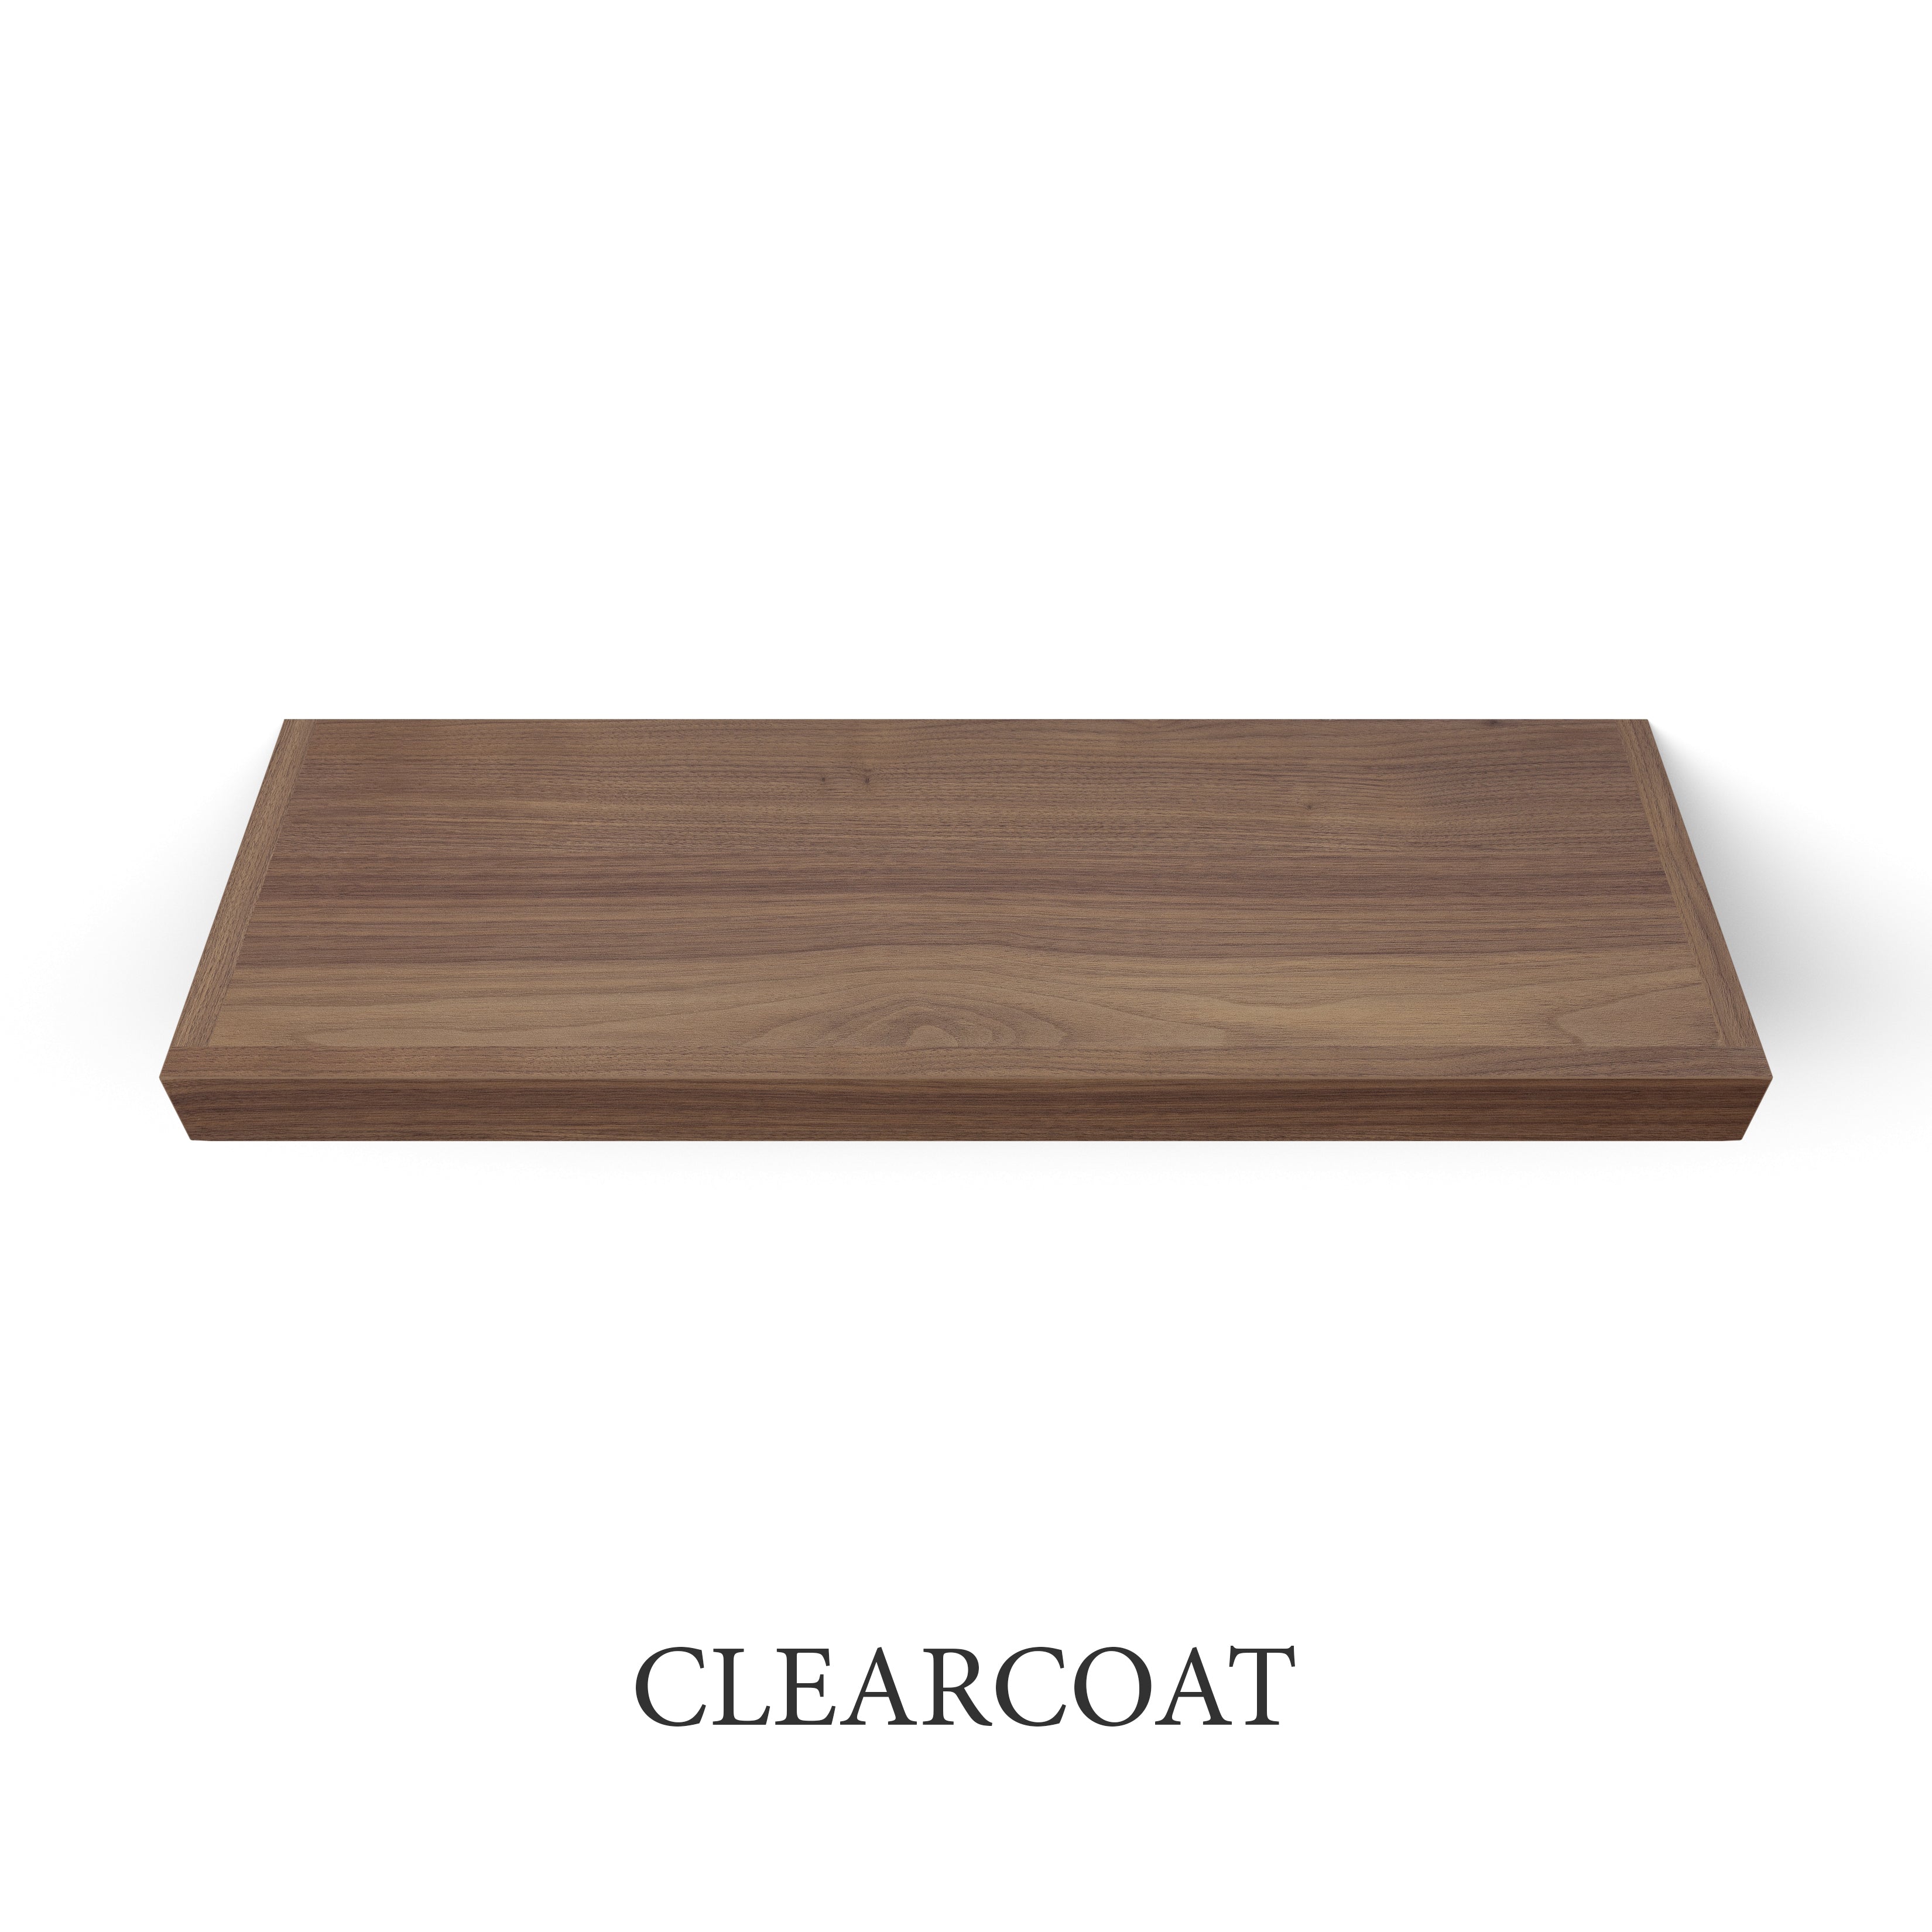 clearcoat Walnut 2 Inch Thick LED Lighted Floating Shelf - Battery